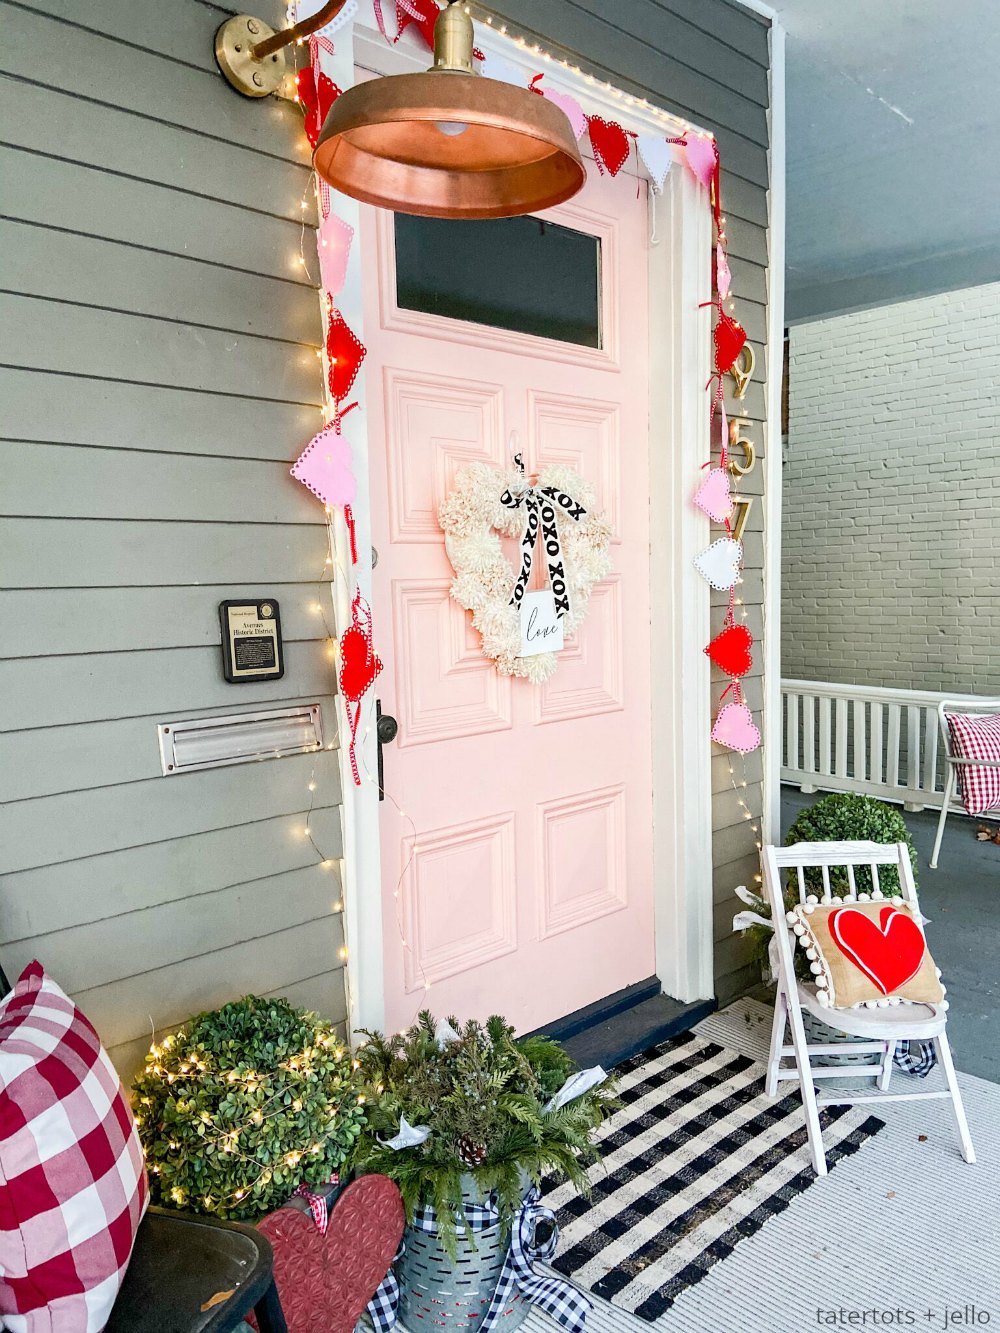 How to Make a Valentine Heart Pom Pom Yarn Wreath. Brighten up your door this winter with a textured pom pom wreath for valentine's Day!